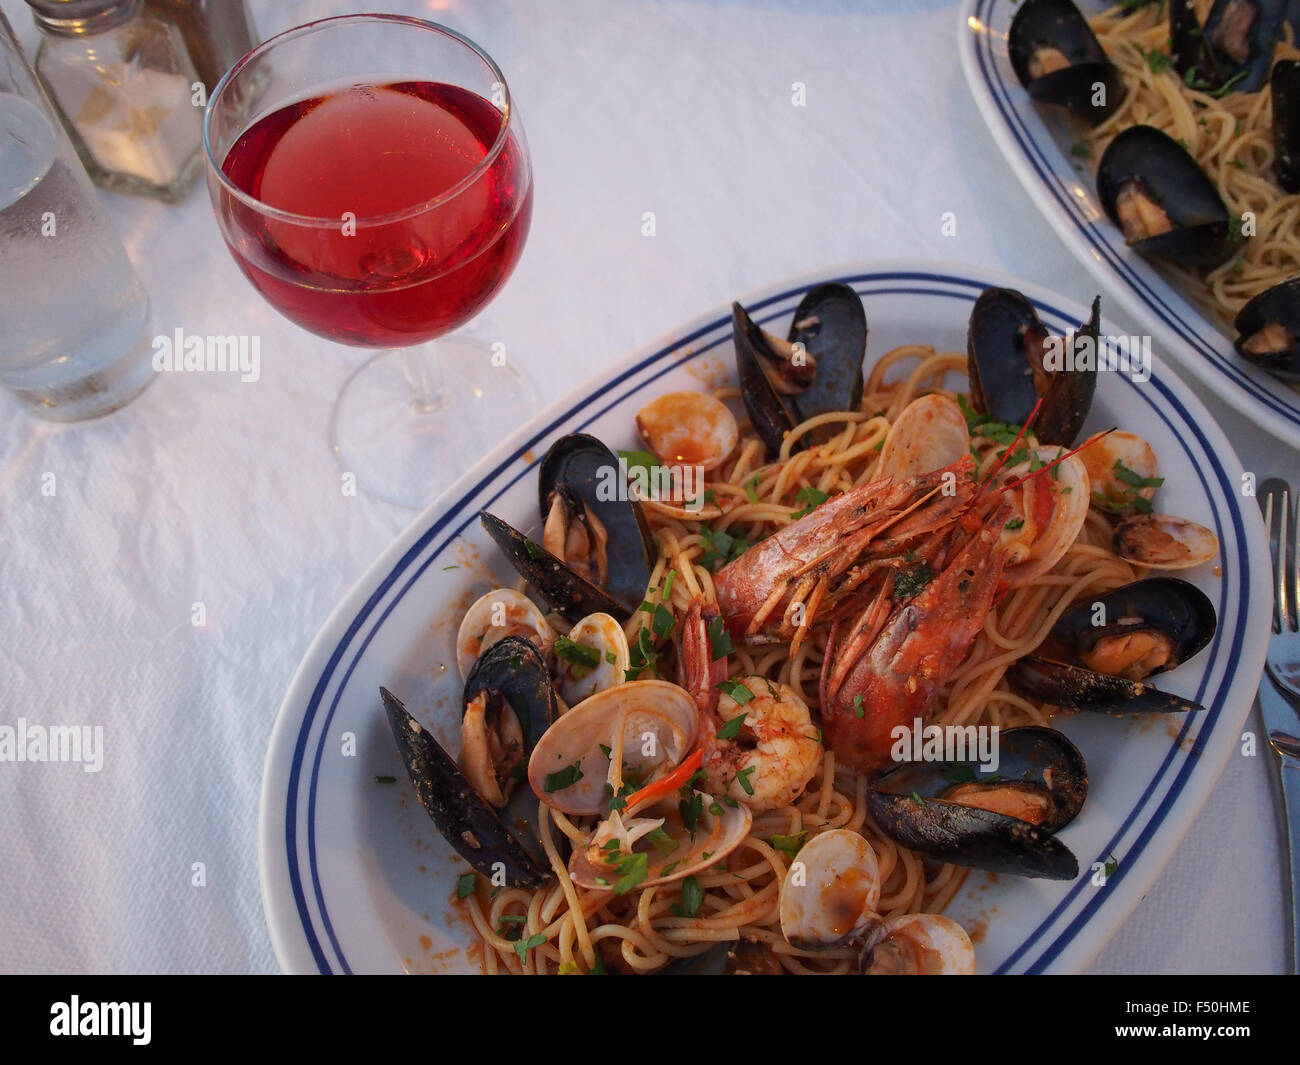 Seafood pasta with clams, mussels, and shrimp in Greece Stock Photo